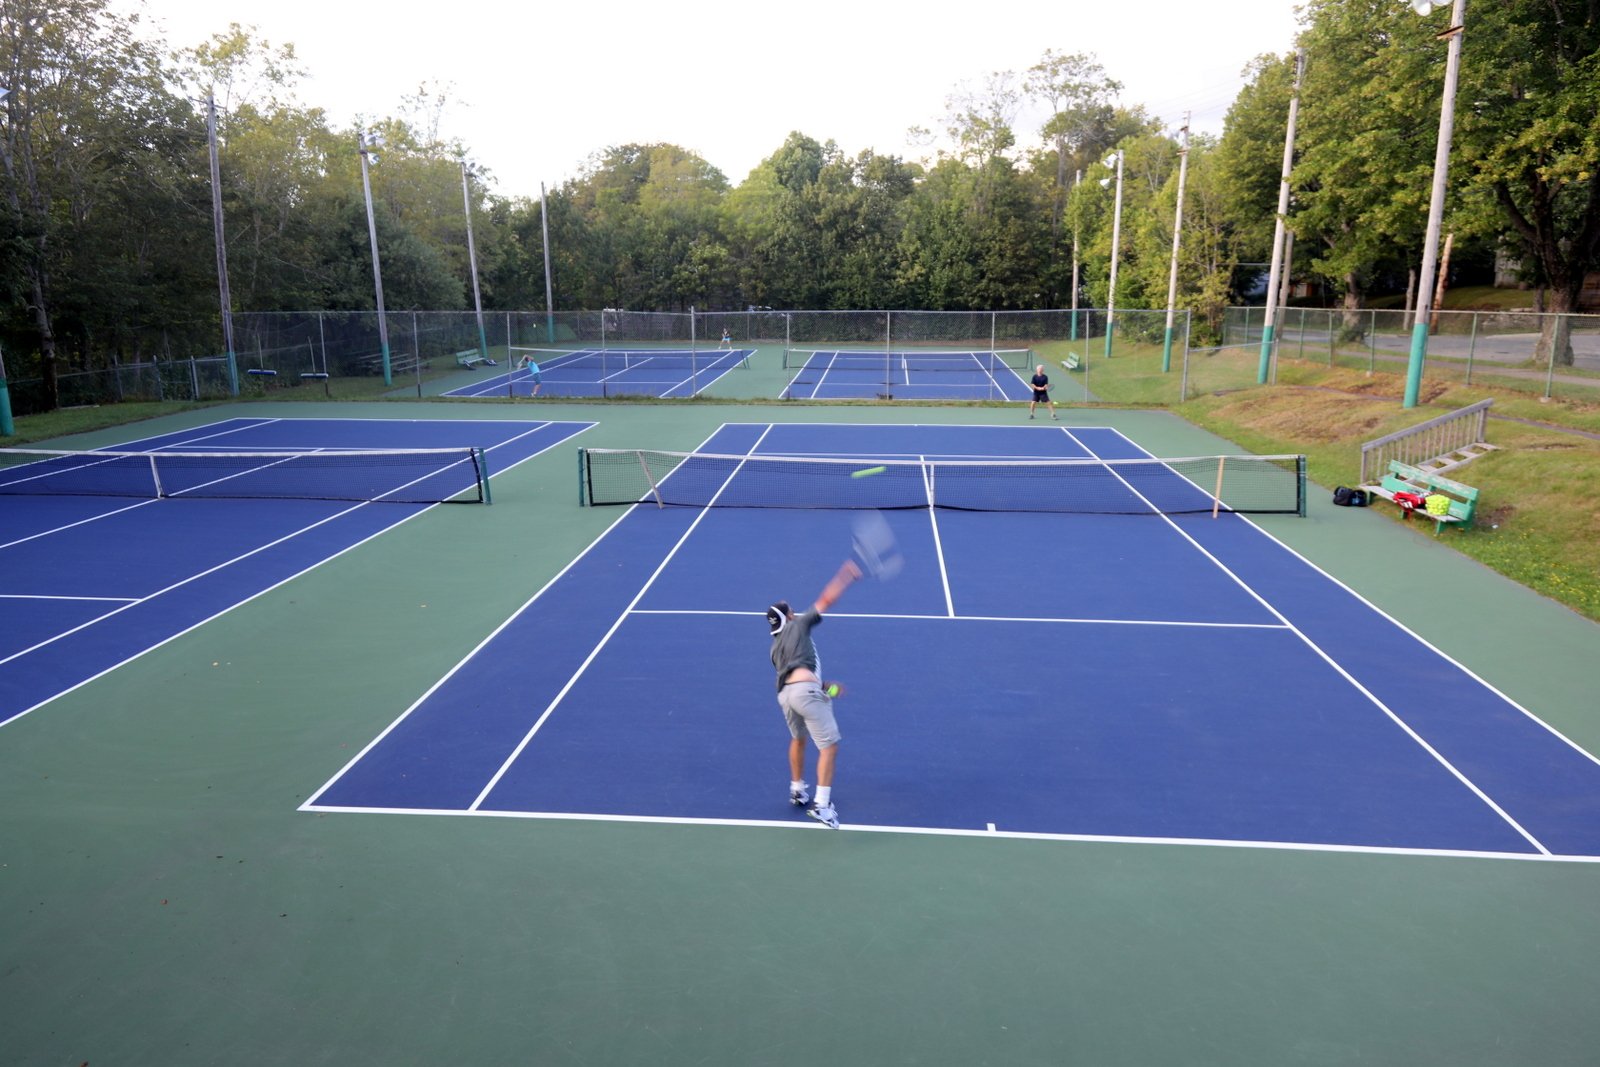 The Most Community-Focused Pickleball Courts: Local Love